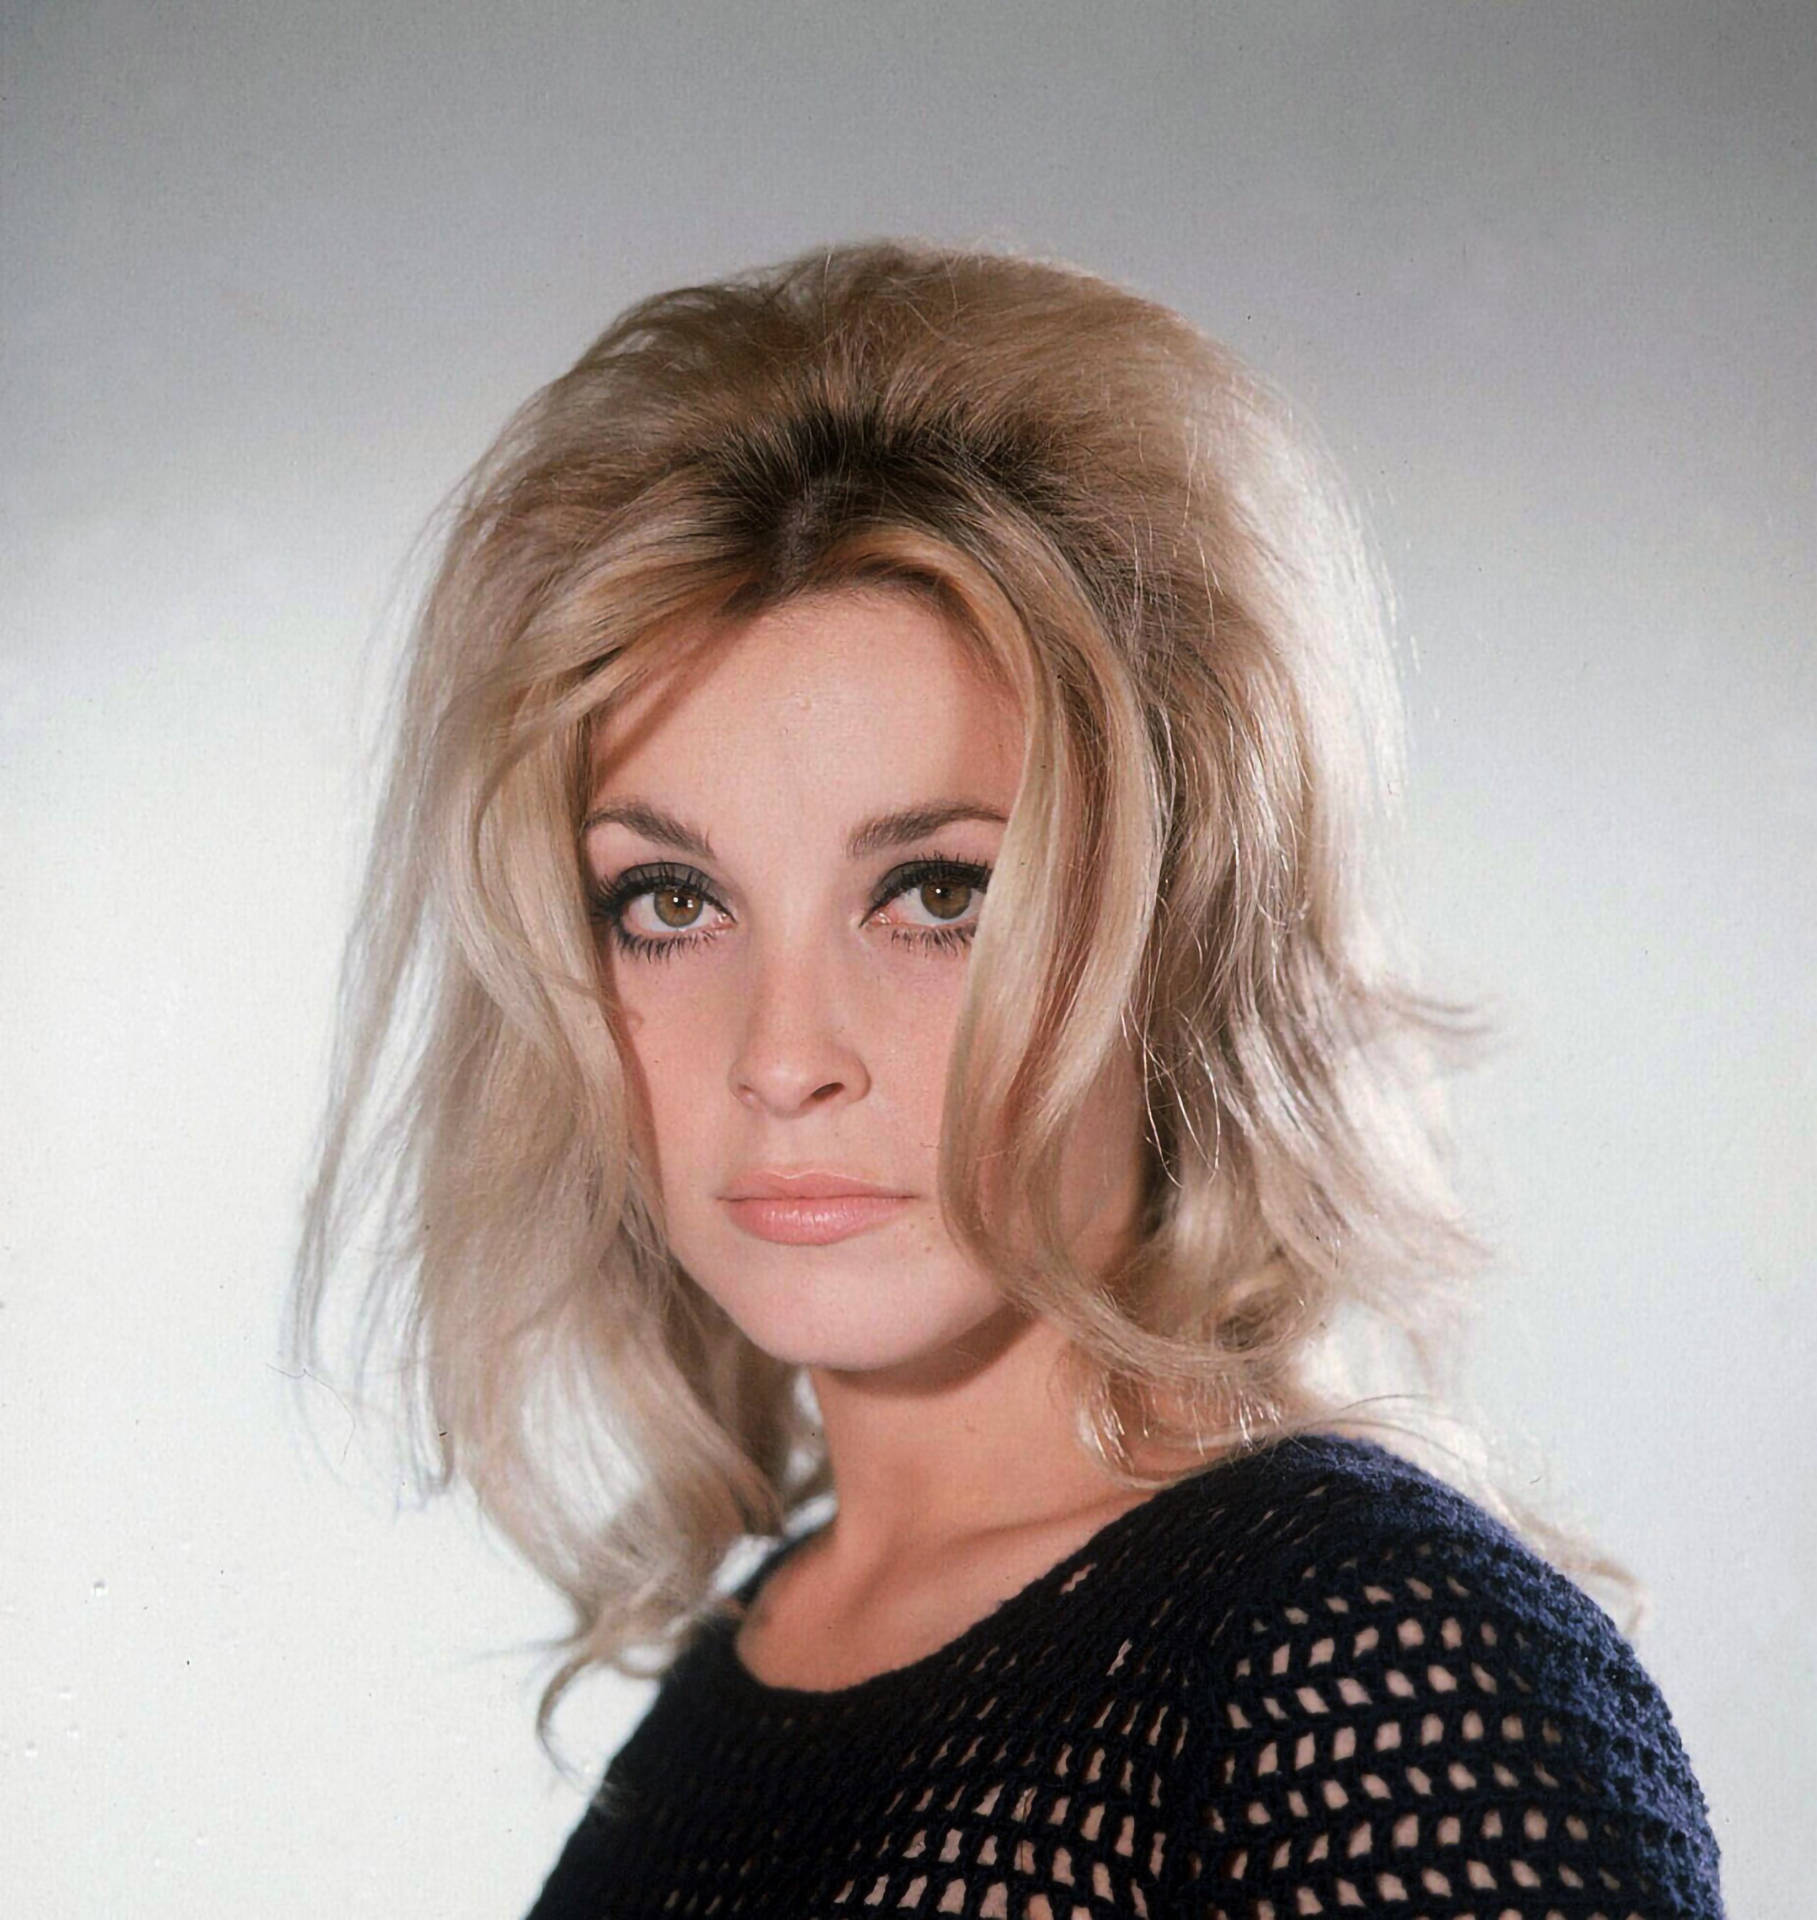 Sharon Tate Posing With Elusive Messy Hairstyle Background